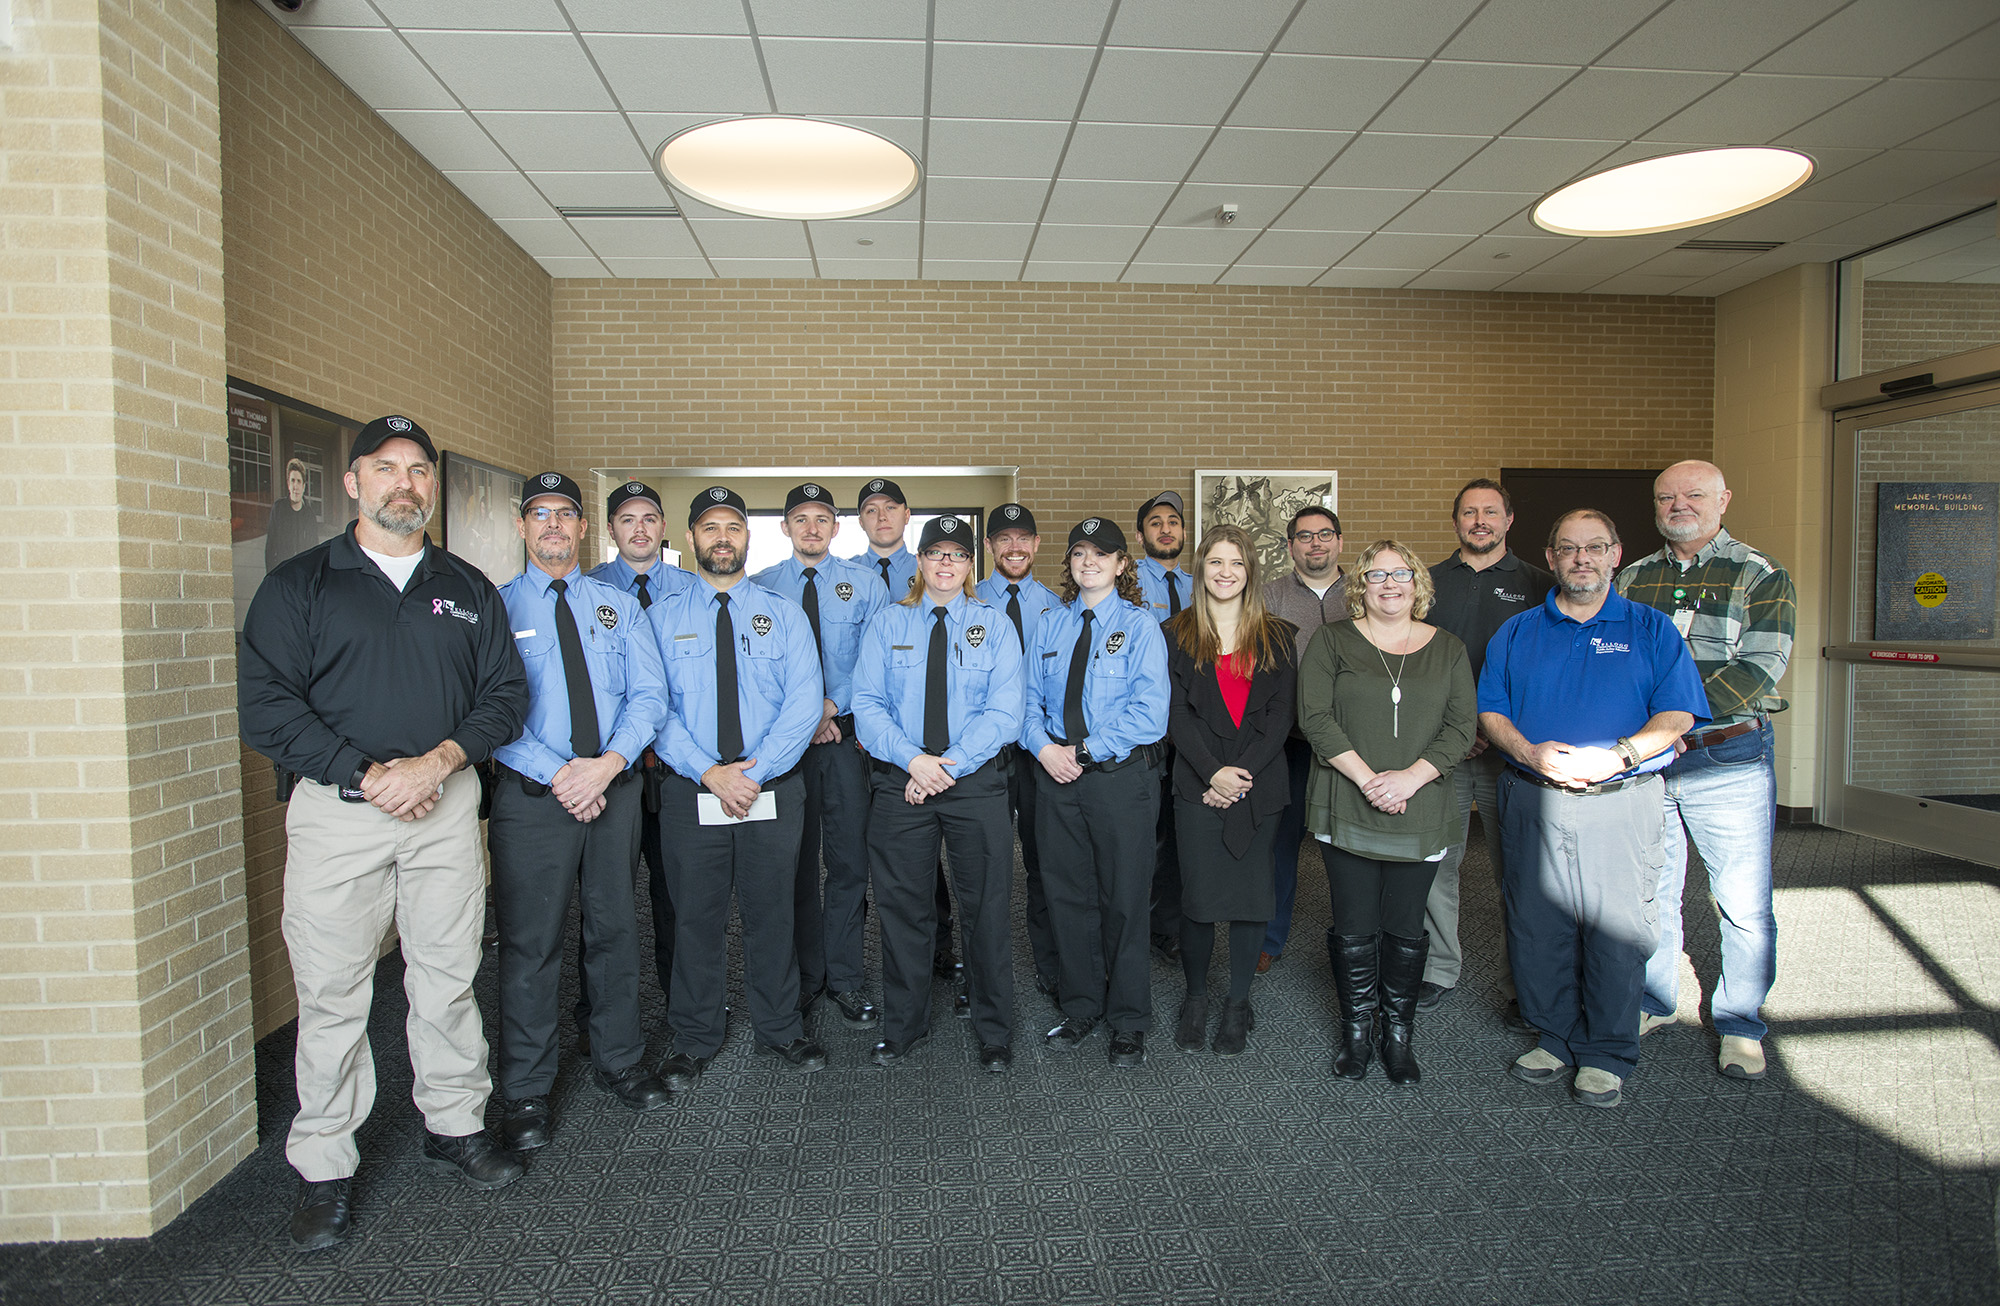 KCC Public Safety Education students and staff pose for a large group photo with S.A.F.E. Place shelter director and legal advocate Melissa Smith.